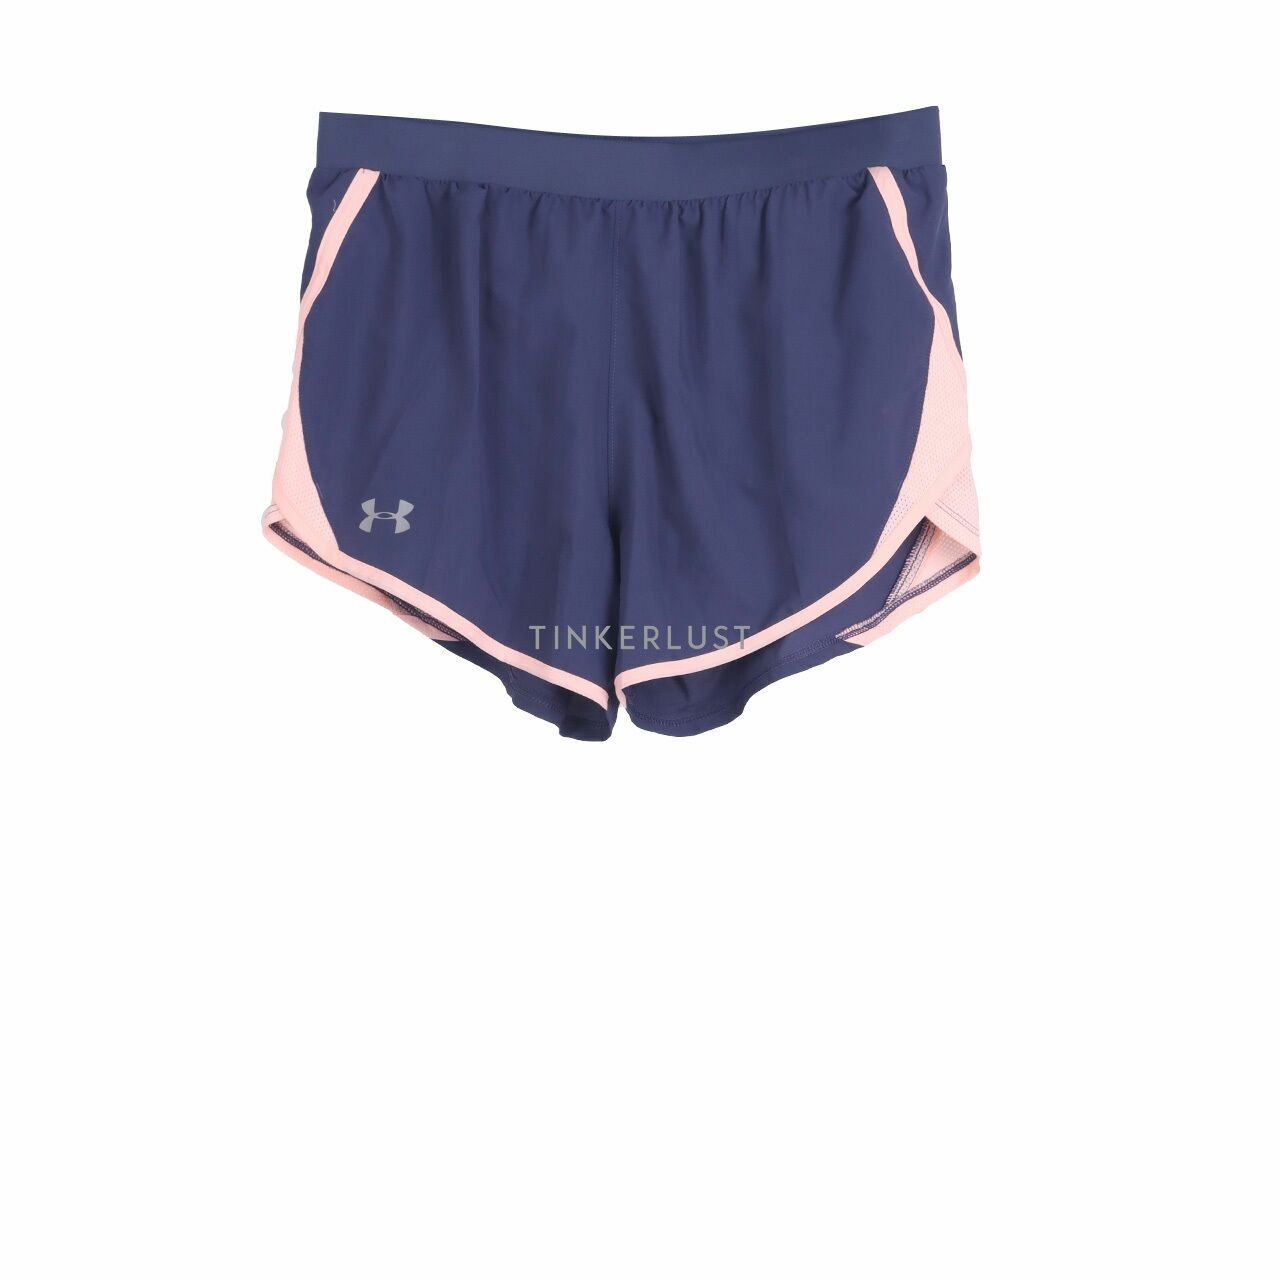 Under Armour Blue & Pink Shorts